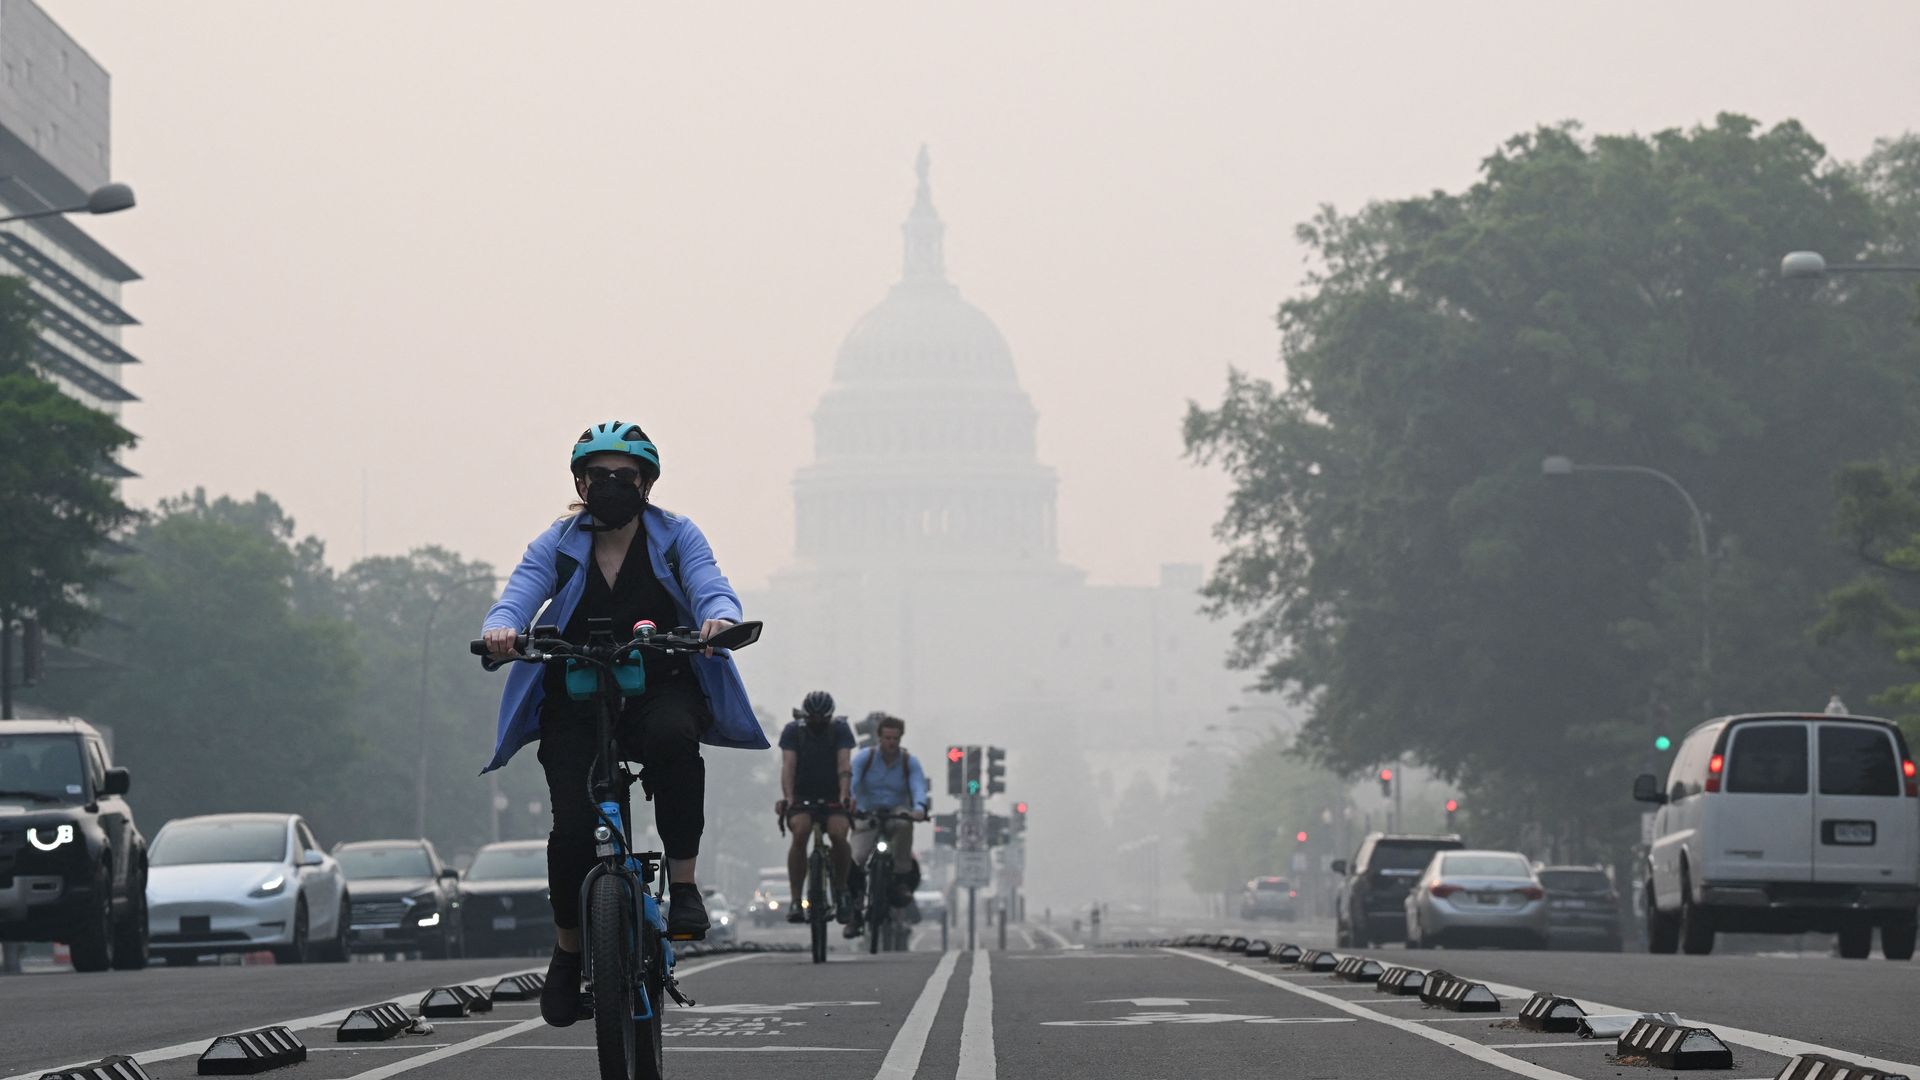 Cyclists ride on a street in front of the US Capitol Building as it is enveloped in wildfire smoke.